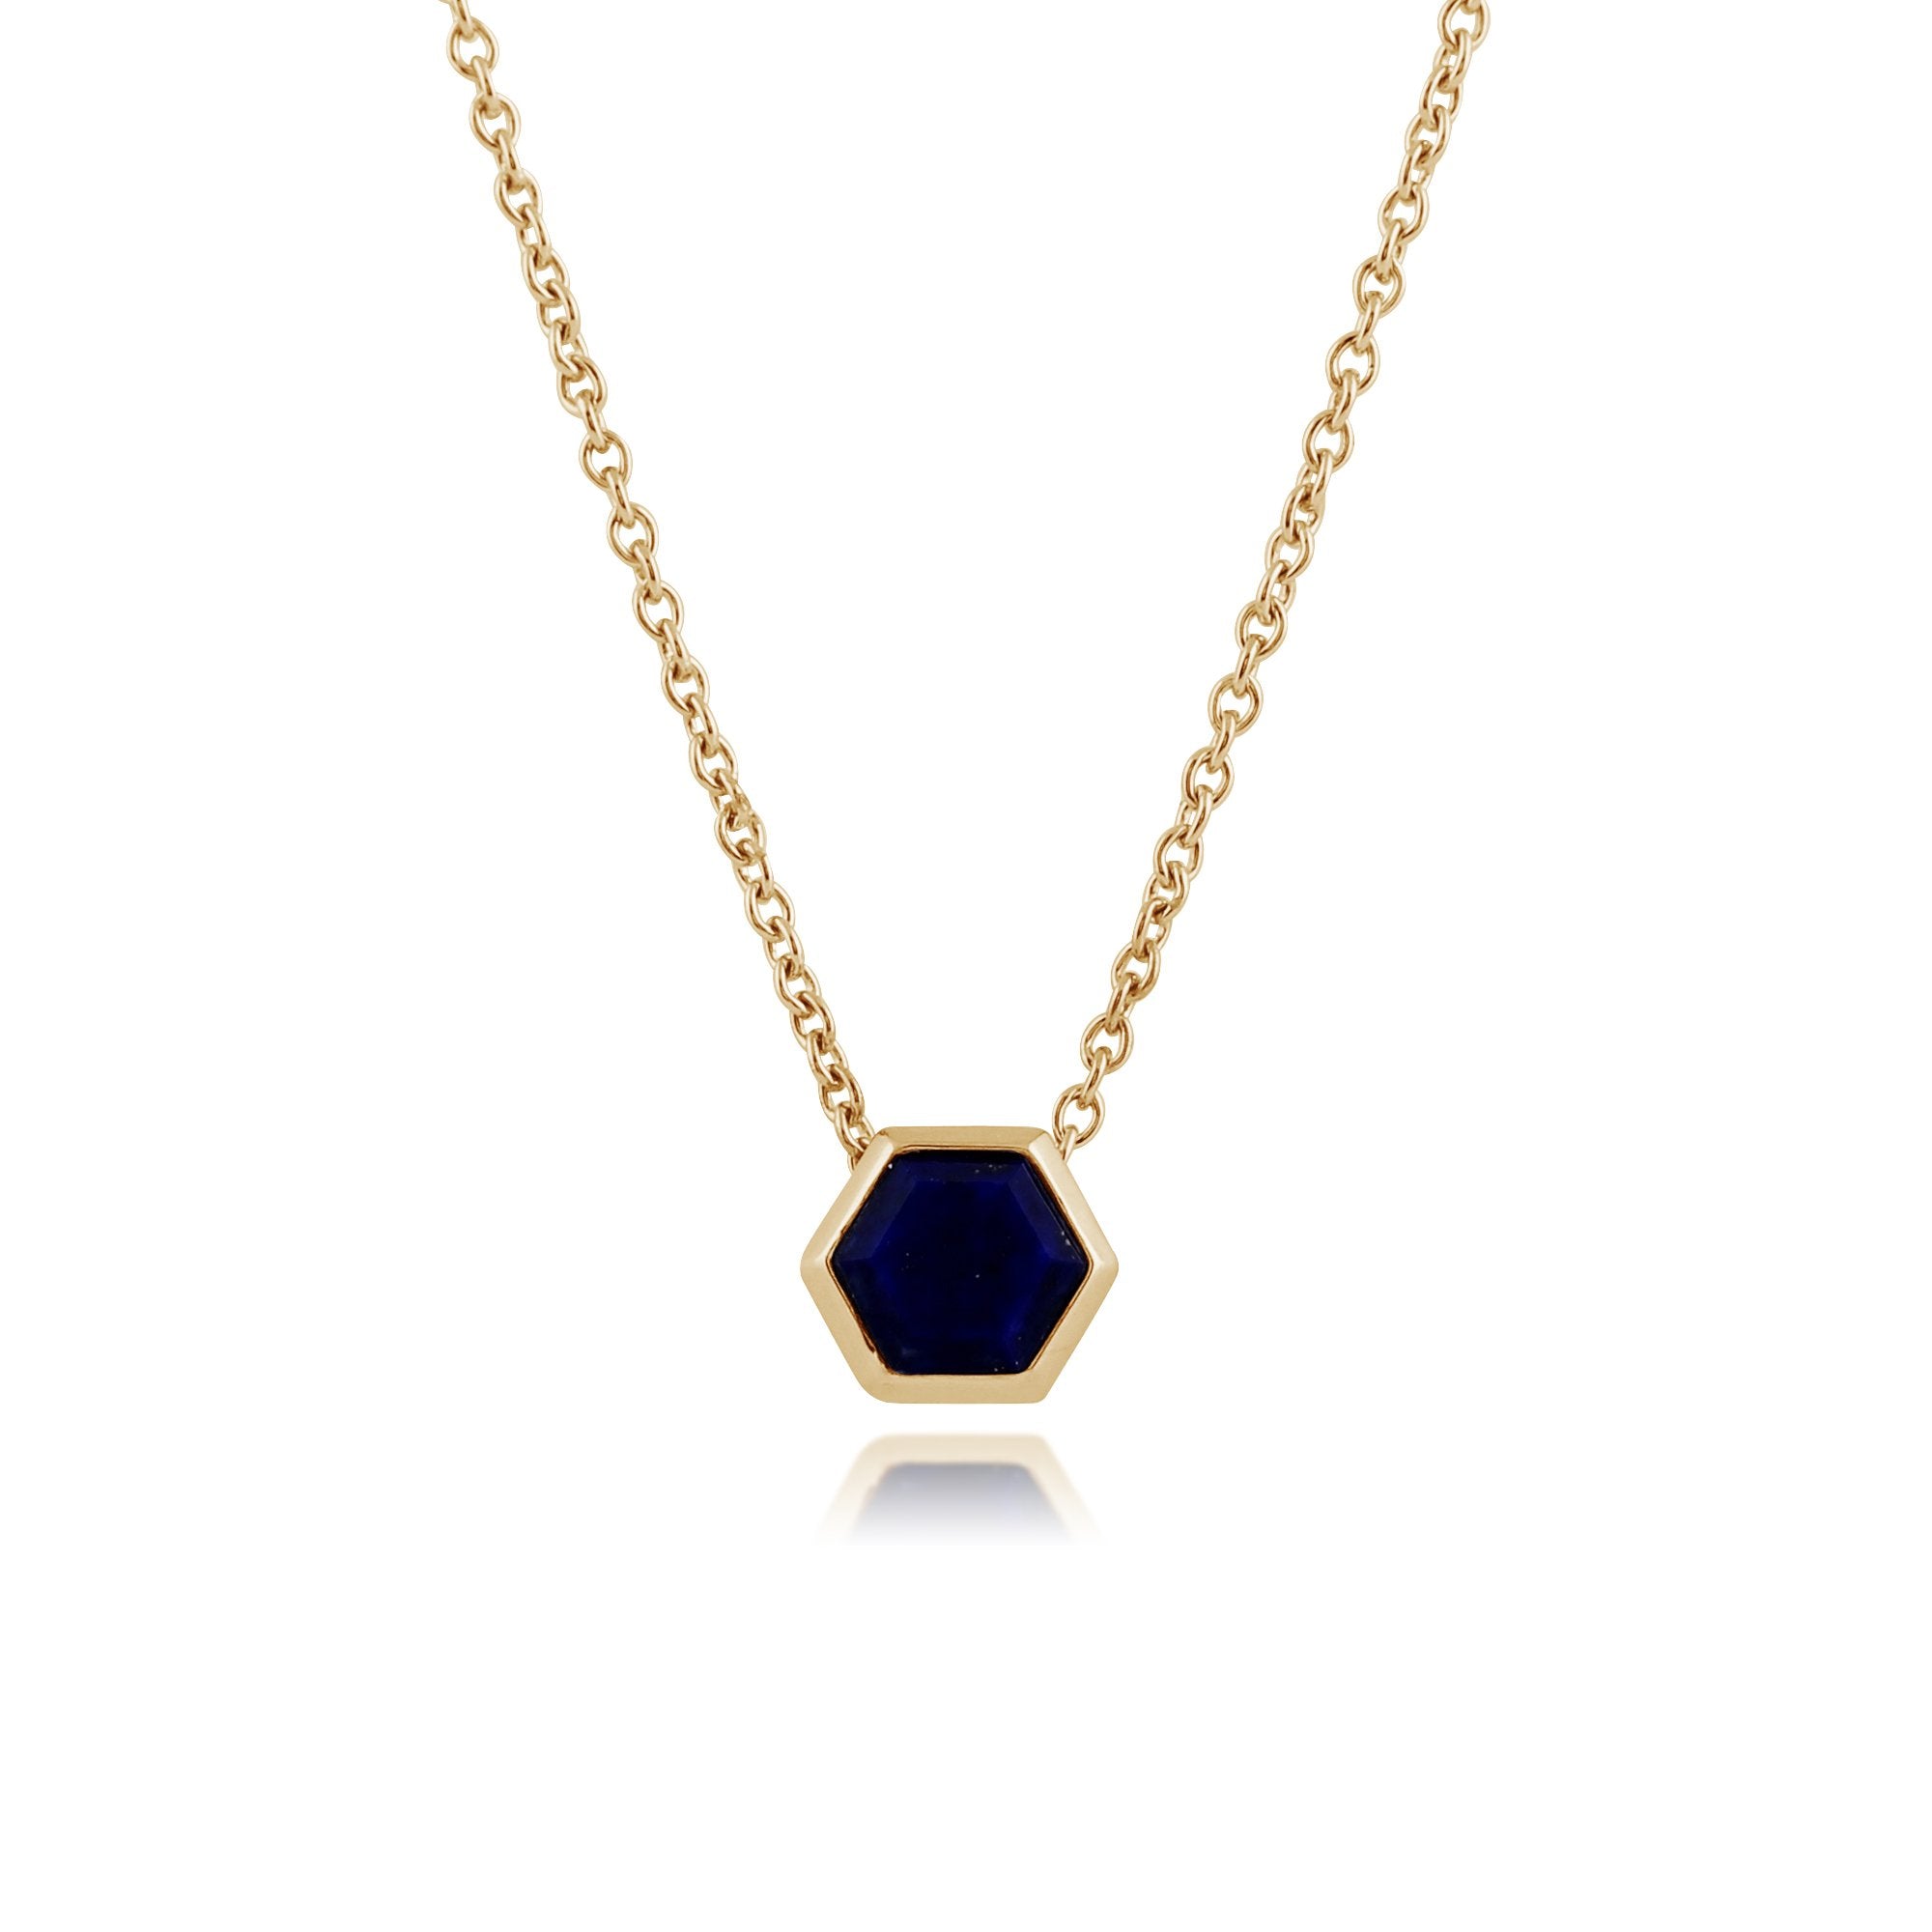 Geometric Hexagon Lapis Lazuli Necklace in Gold Plated Silver